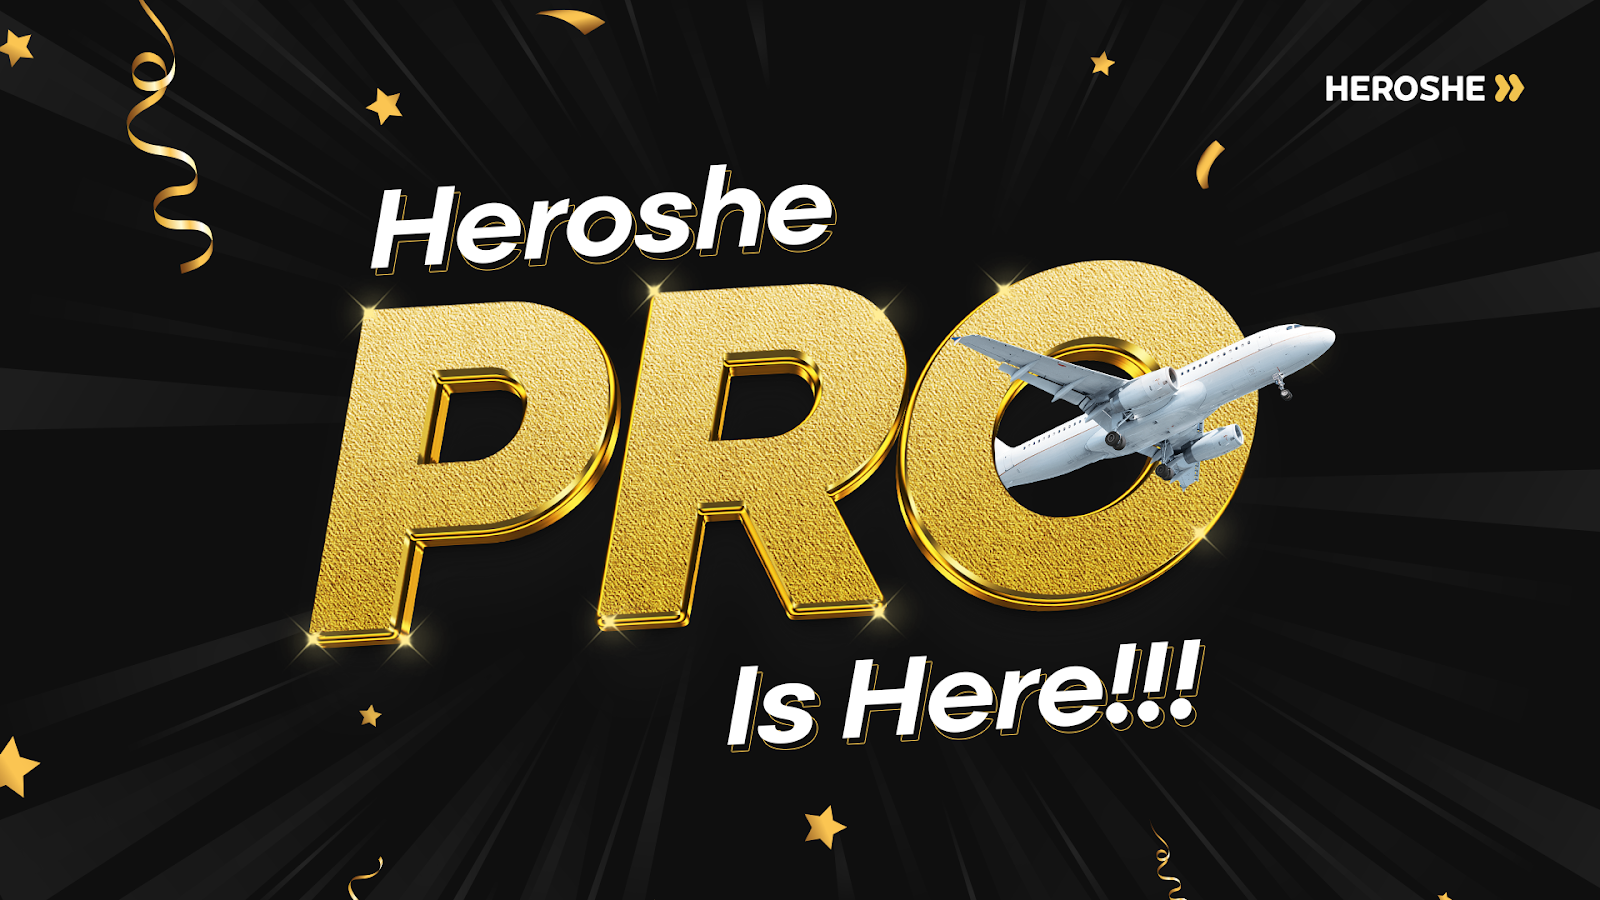 Heroshe Pro is here. When you get a great small business idea like dropshipping, use heroshe Pro as your shipping buddy